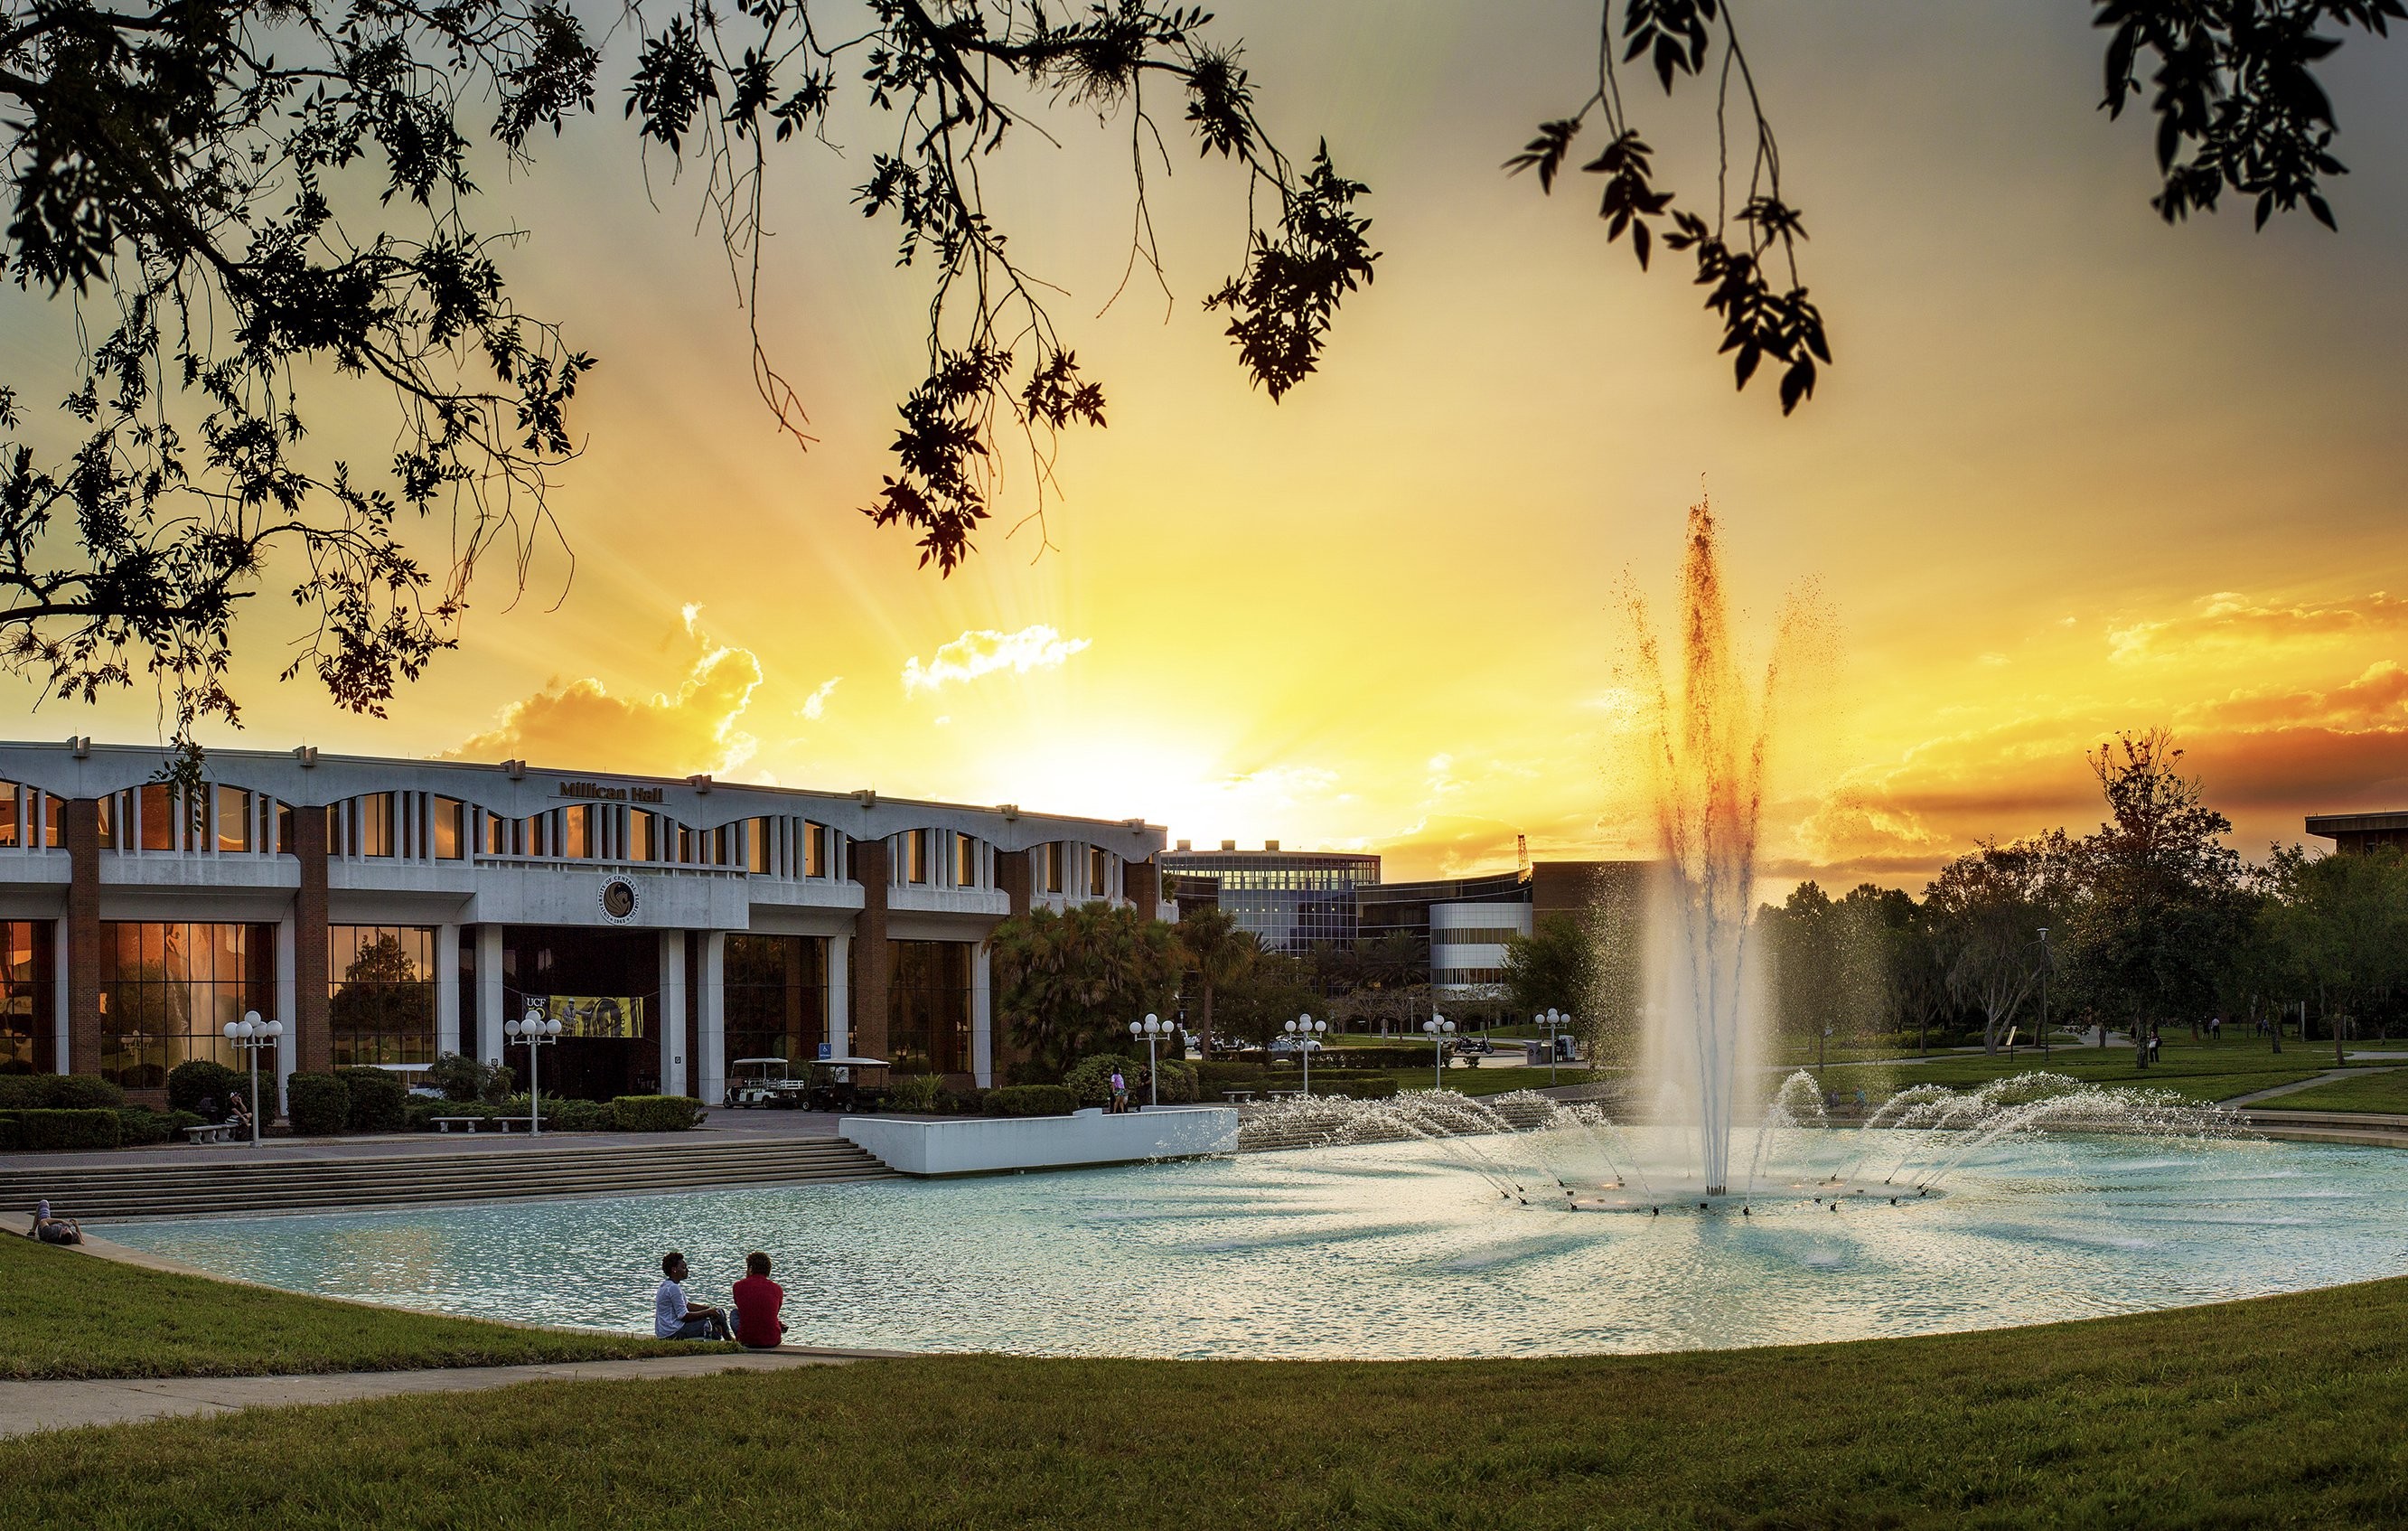 Millican Hall at the University of Central Florida